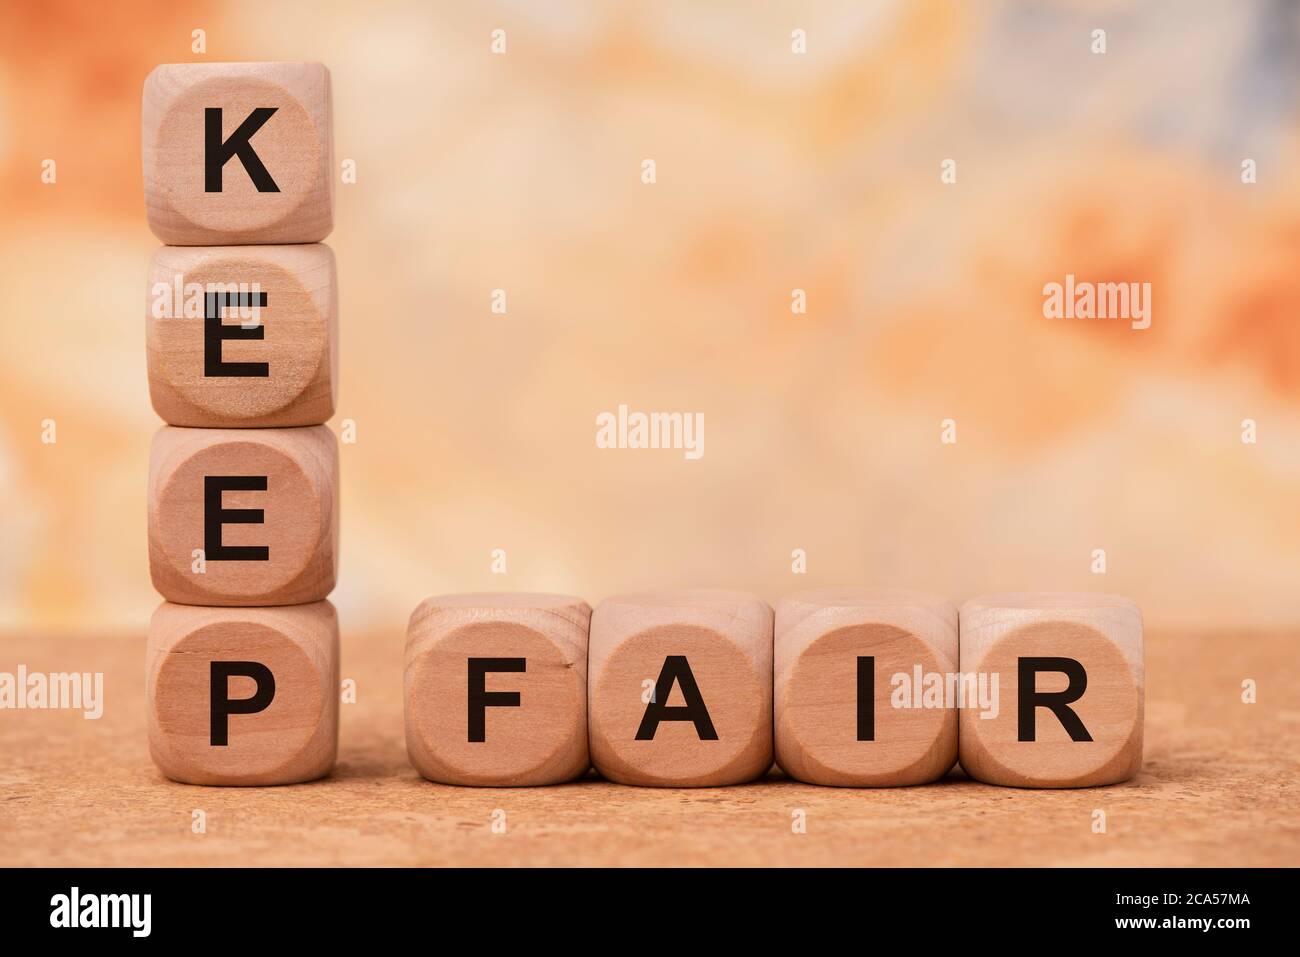 keep fair printed on wooden cubes Stock Photo